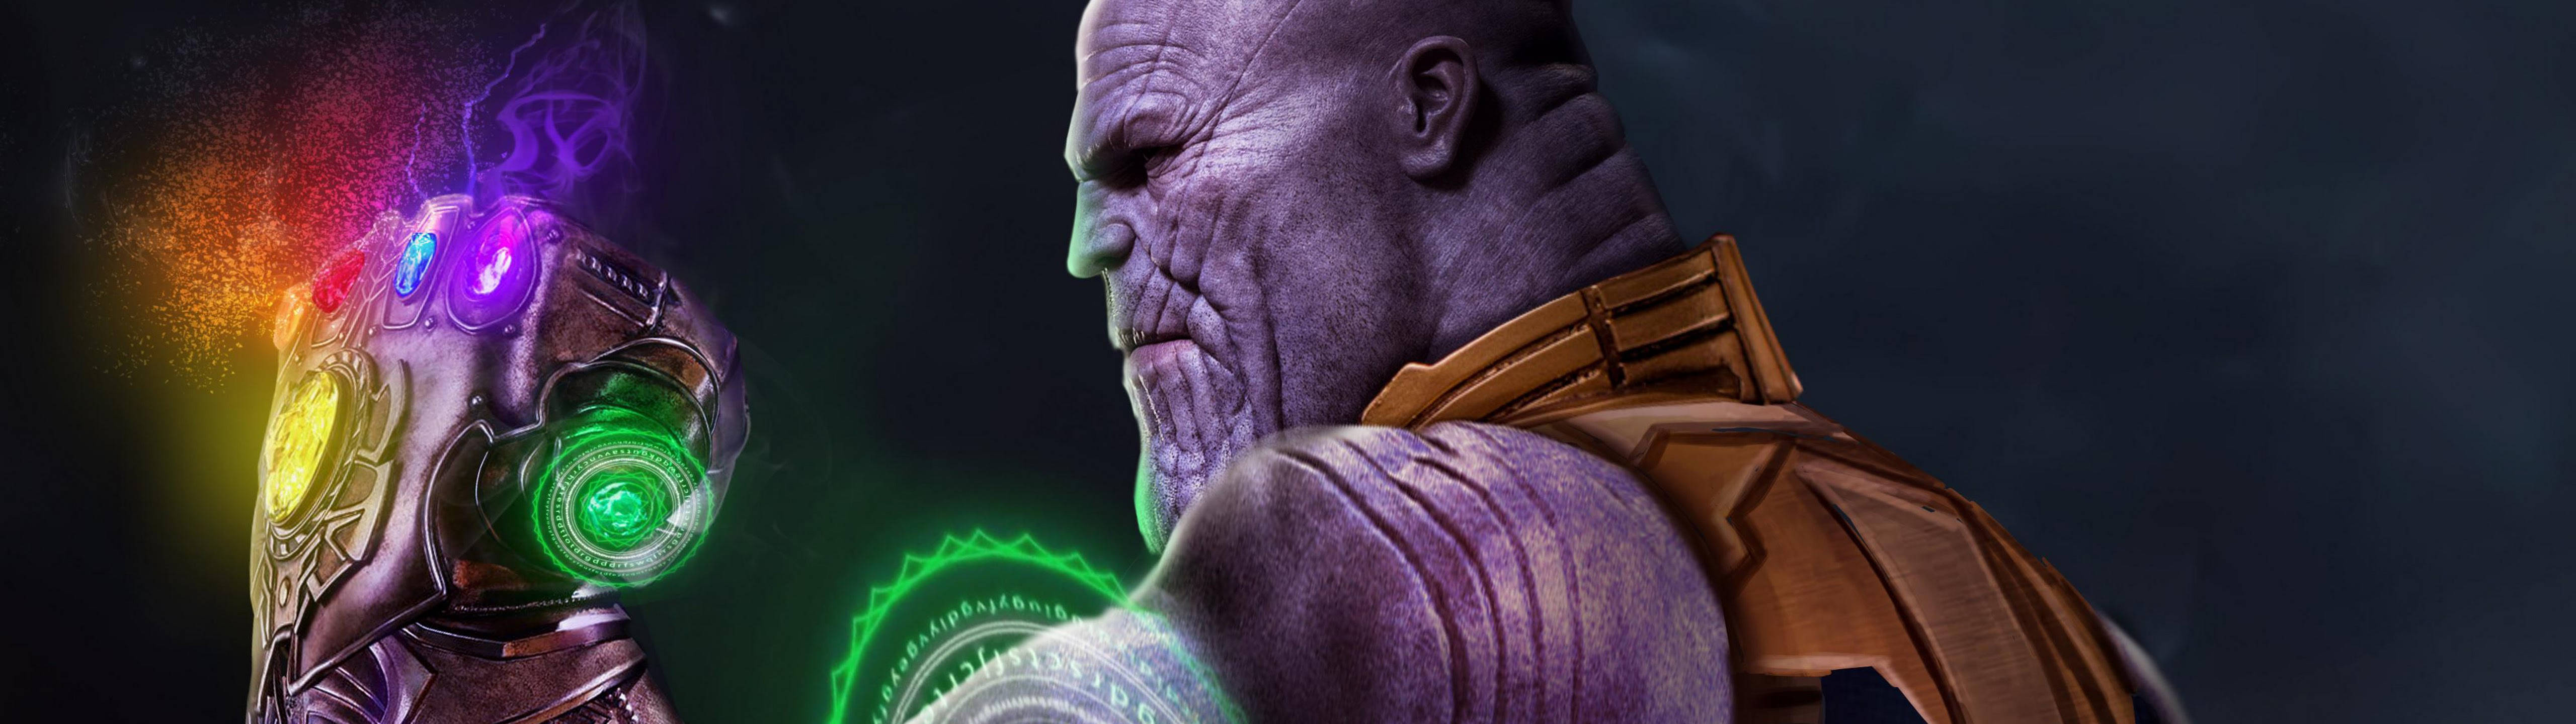 Marvel's Thanos With Infinity Gauntlet 5120 X 1440 Wallpaper